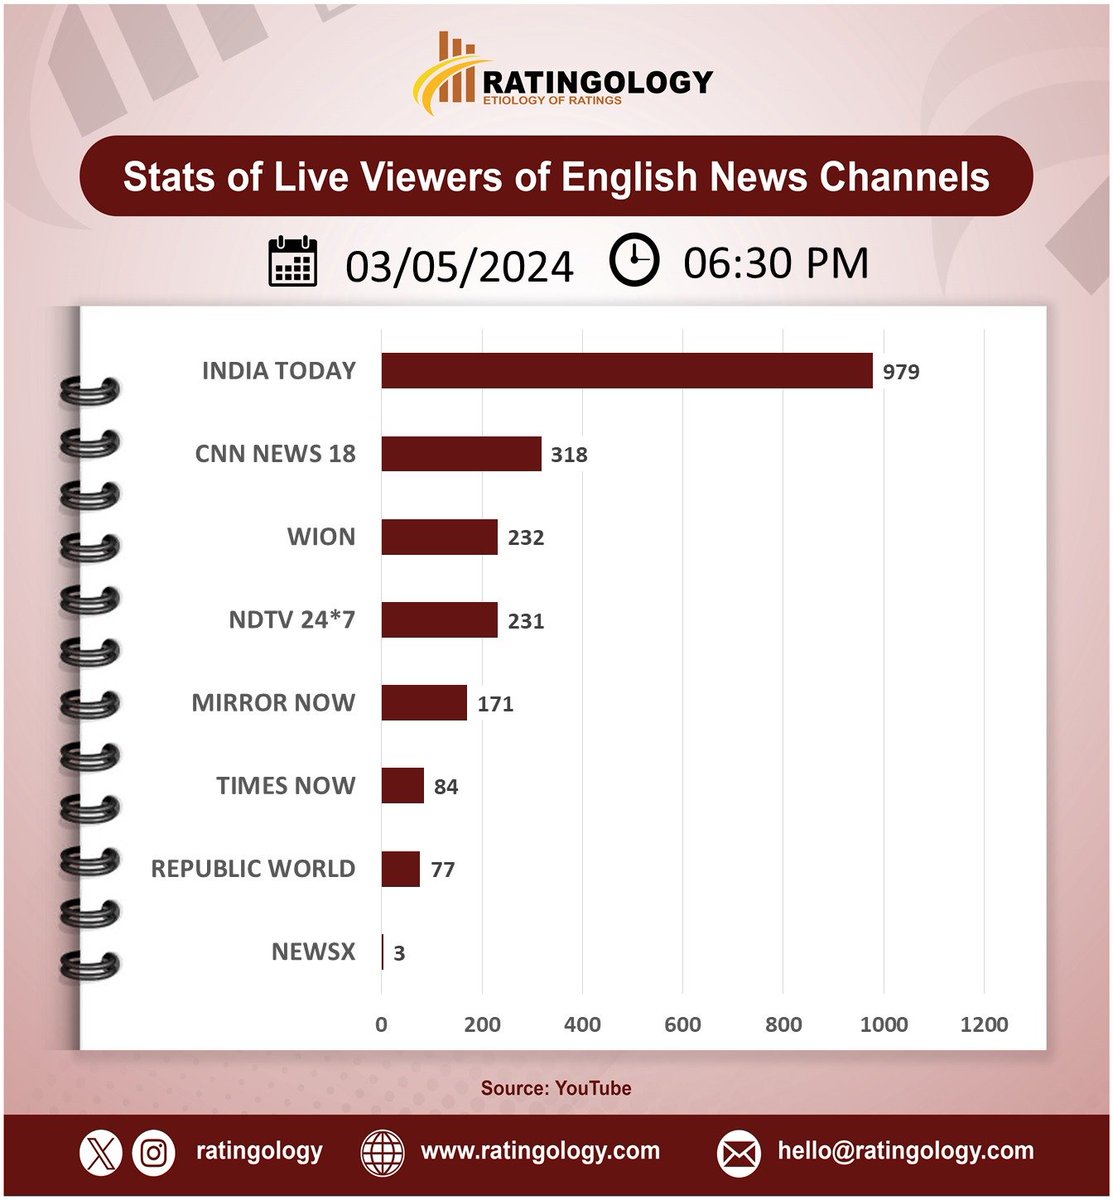 𝐒𝐭𝐚𝐭𝐬 𝐨𝐟 𝐥𝐢𝐯𝐞 𝐯𝐢𝐞𝐰𝐞𝐫𝐬 𝐨𝐧 #Youtube of #EnglishMedia #channelsat 06:30pm, Date: 03/May/2024  #Ratingology #Mediastats #RatingsKaBaap #DataScience #IndiaToday #Wion #RepublicTV #CNNNews18 #TimesNow #NewsX #NDTV24x7 #MirrorNow